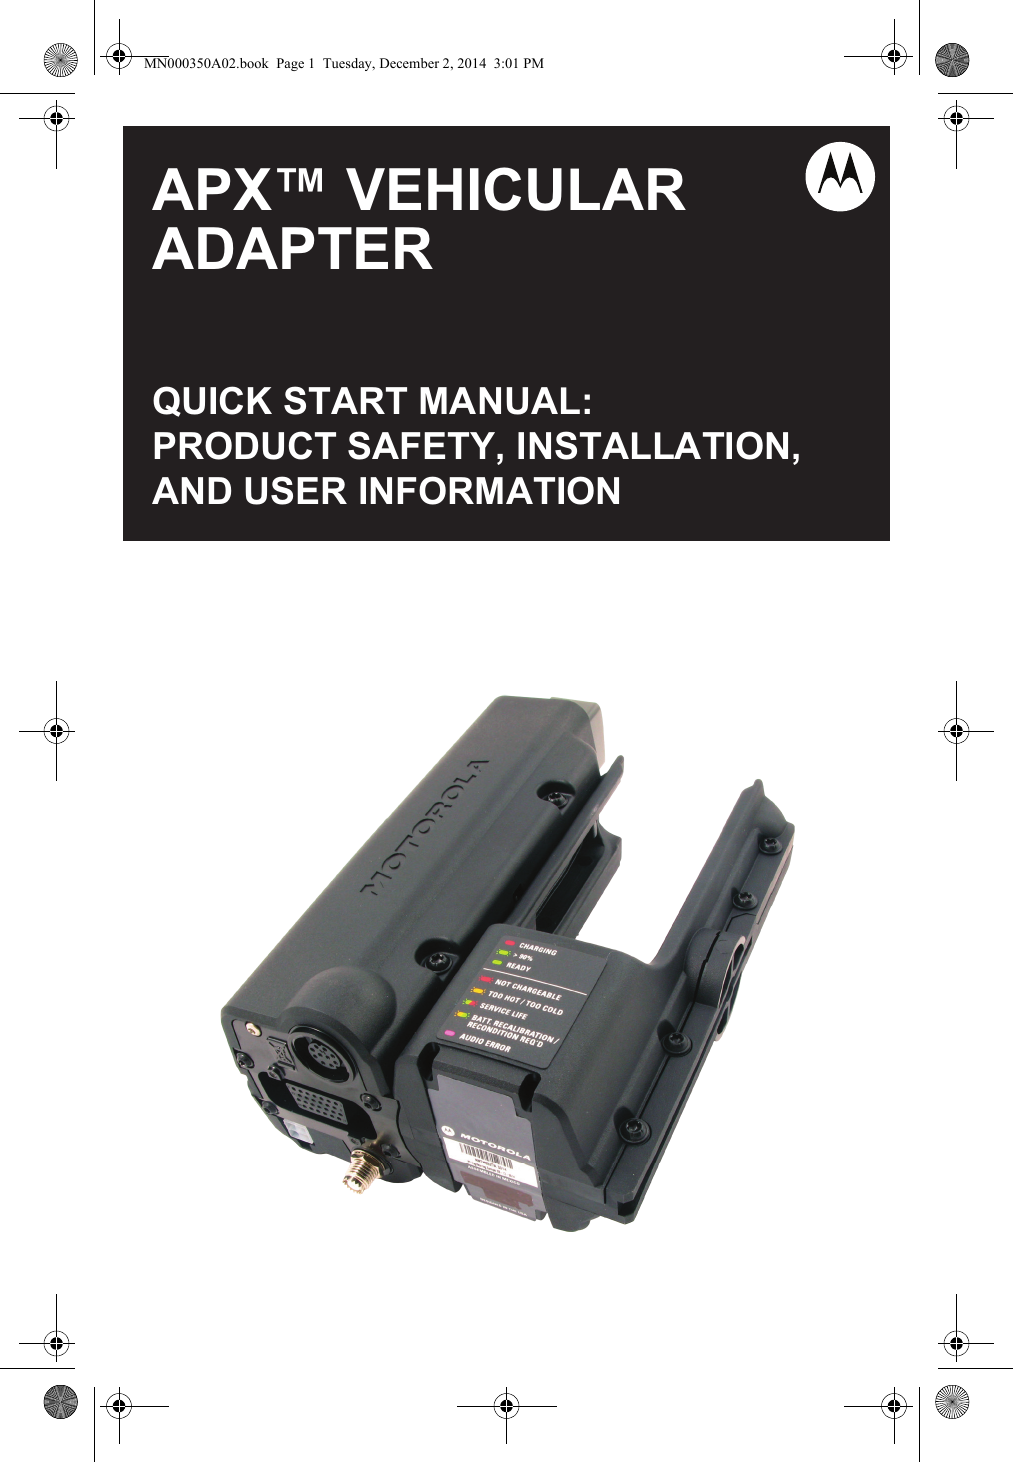 APX™ VEHICULARADAPTERQUICK START MANUAL:PRODUCT SAFETY, INSTALLATION,AND USER INFORMATIONMN000350A02.book  Page 1  Tuesday, December 2, 2014  3:01 PM